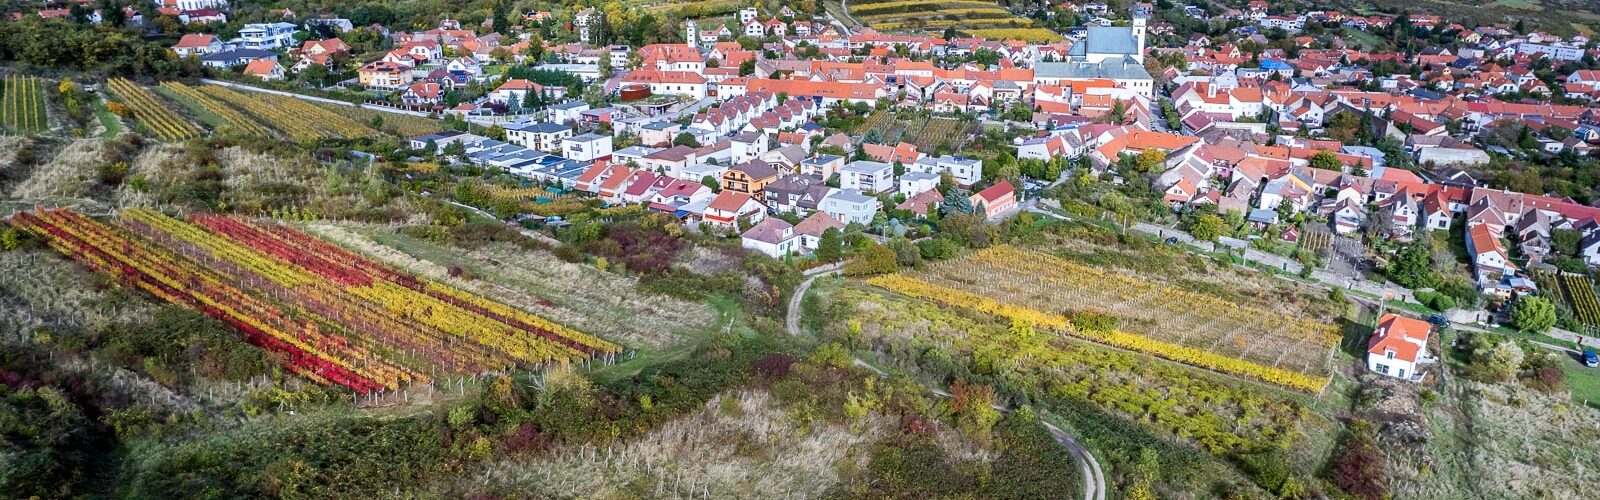 WINESAFARI Svaty Jur Slovakia local glass of wine tasting attraction the best guided tour outdoor fun Pinzgauer new experience vineyards in Bratislava area close to Vienna Austria in Central Europe svaty jur from the sky fly drone in slovakia